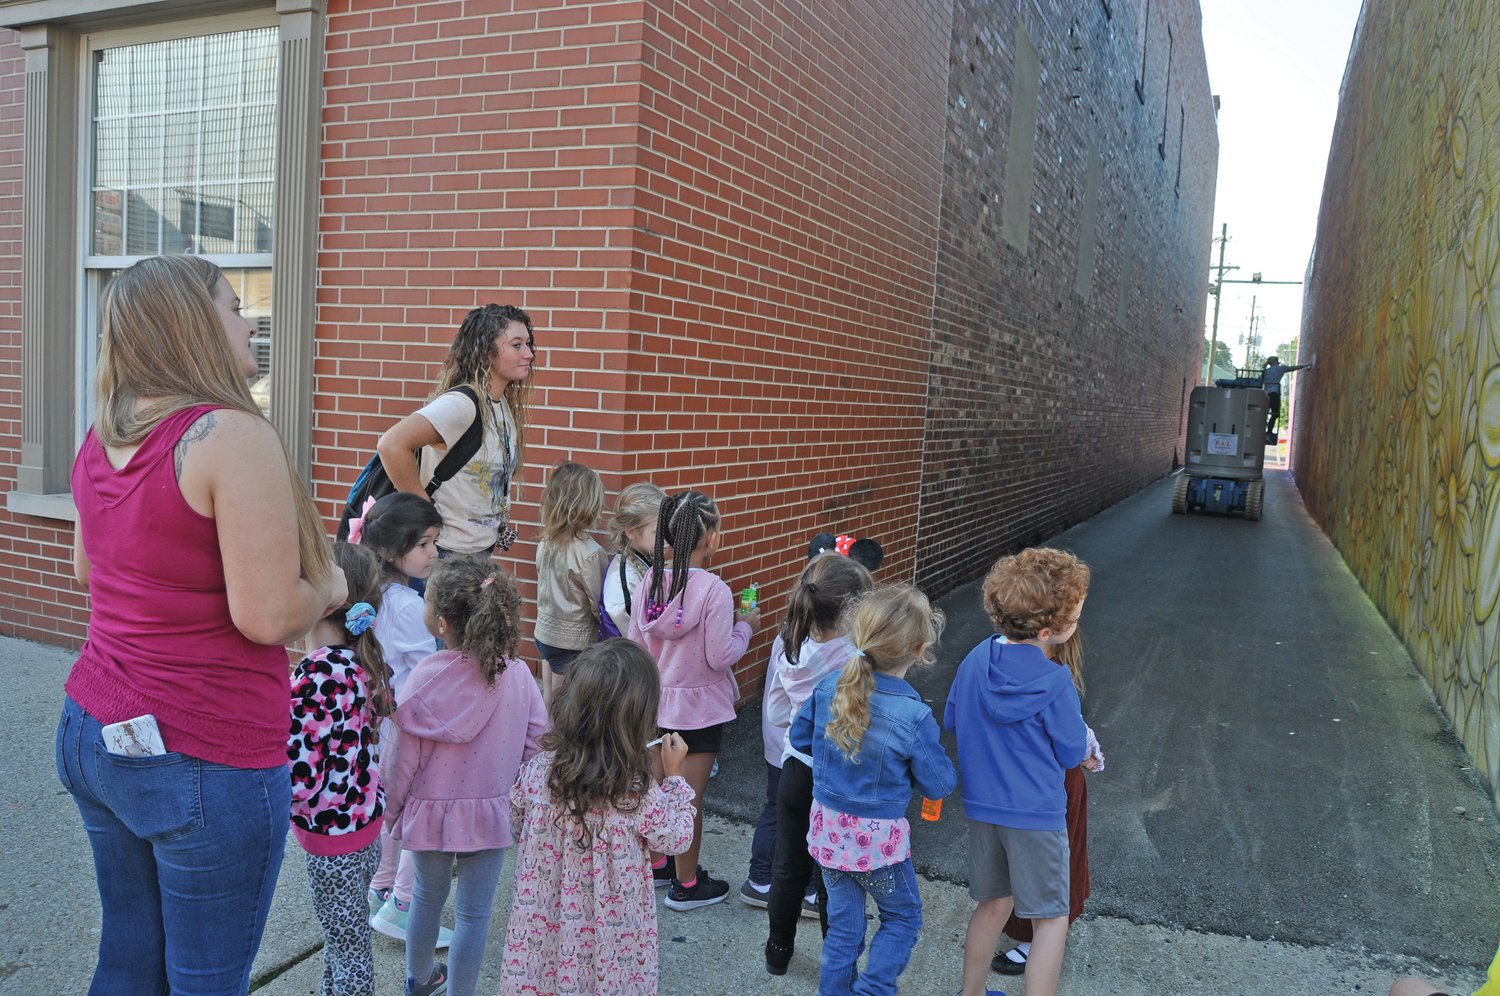 Children and staff from Rainbows & Rhymes Preschool and Child Care watch artist Jenna Morello work on the downtown alley mural on Wednesday.